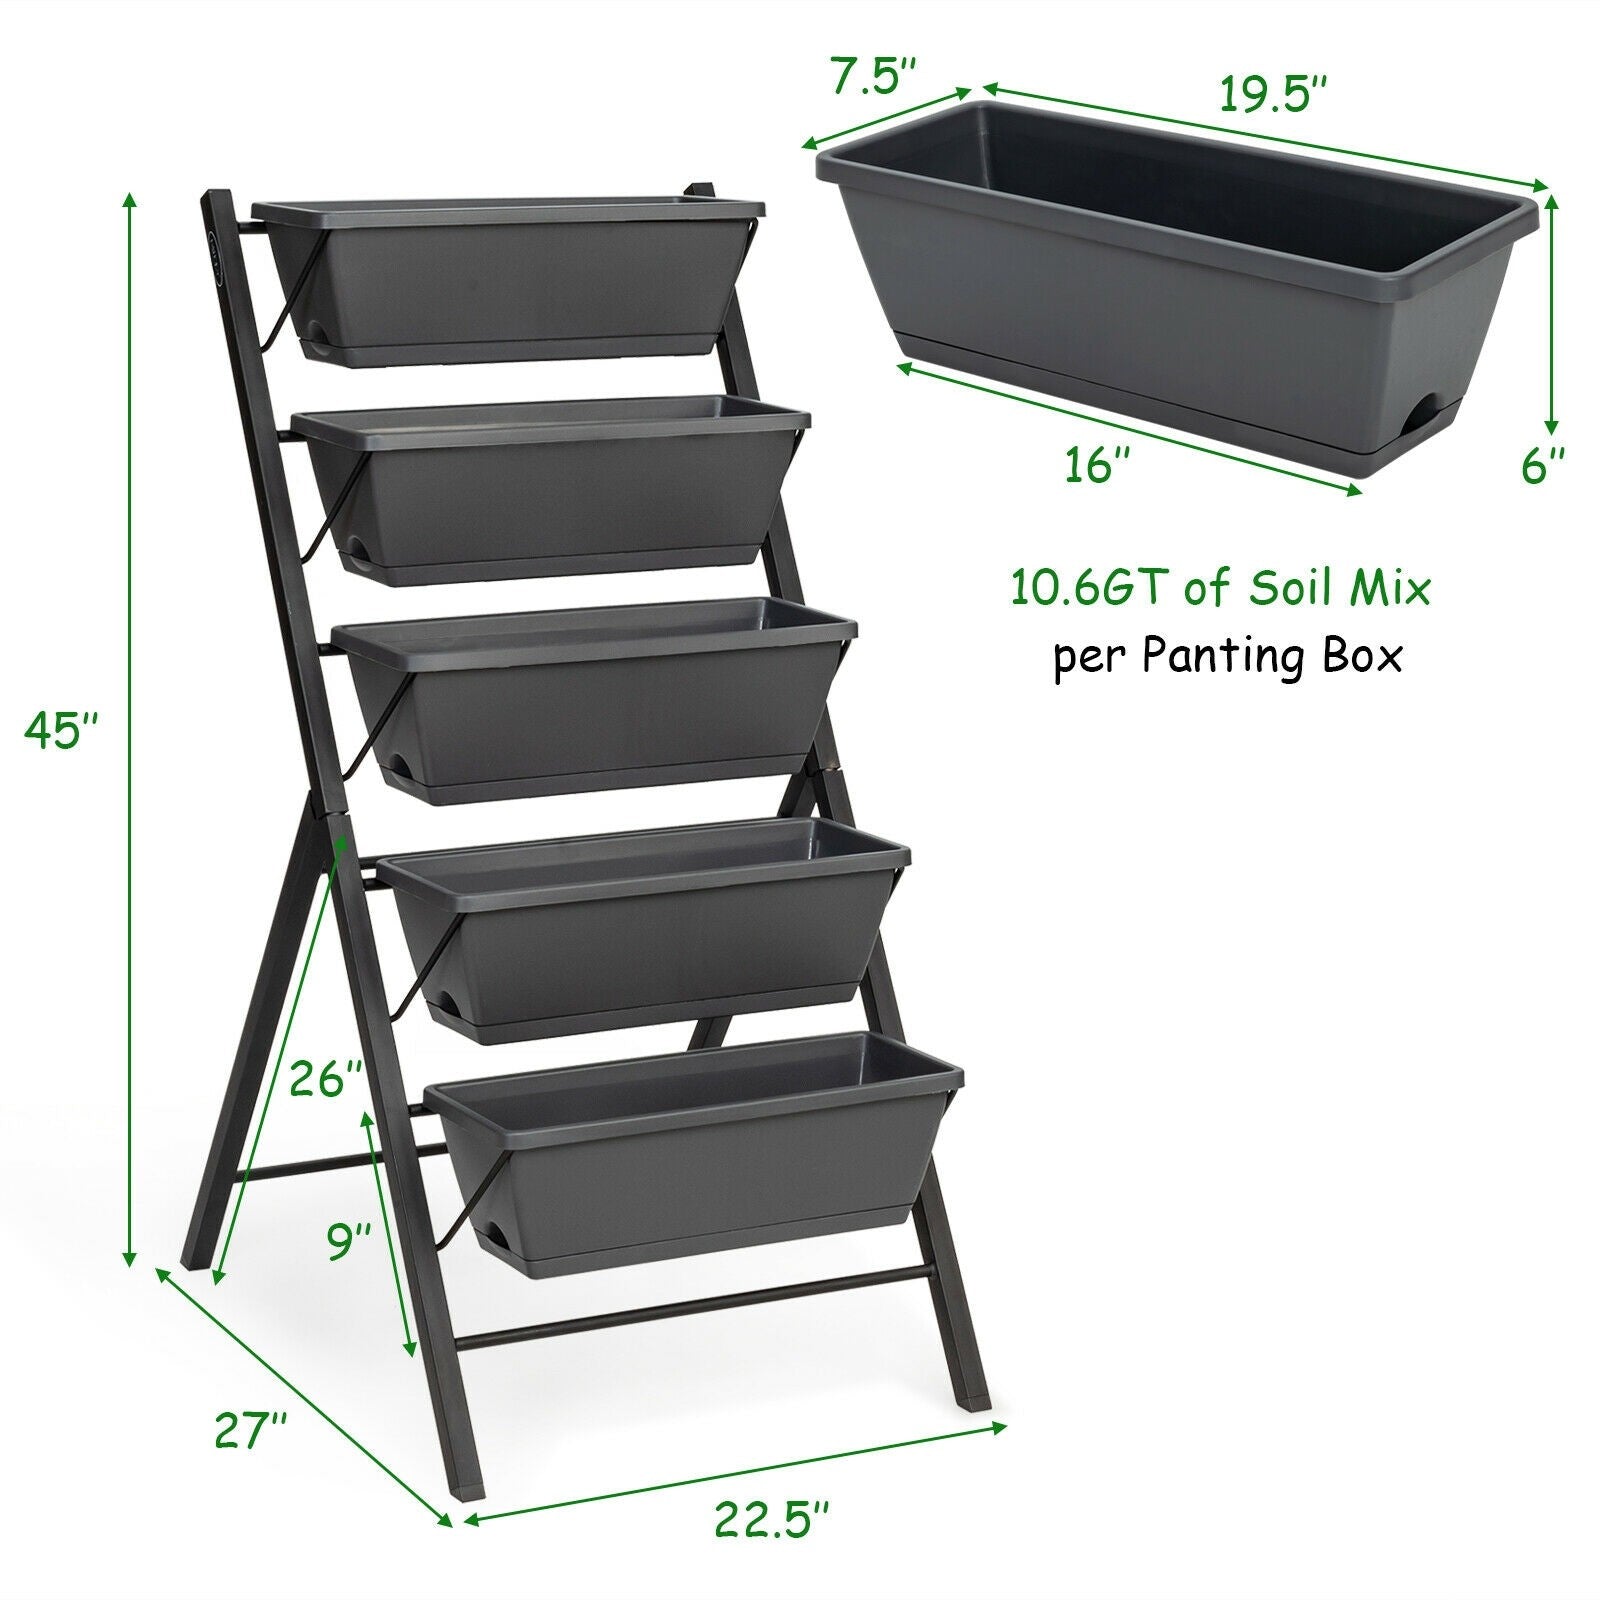 Vertical Raised Garden Bed, Elevated Planter Raised Beds with Water Drainage